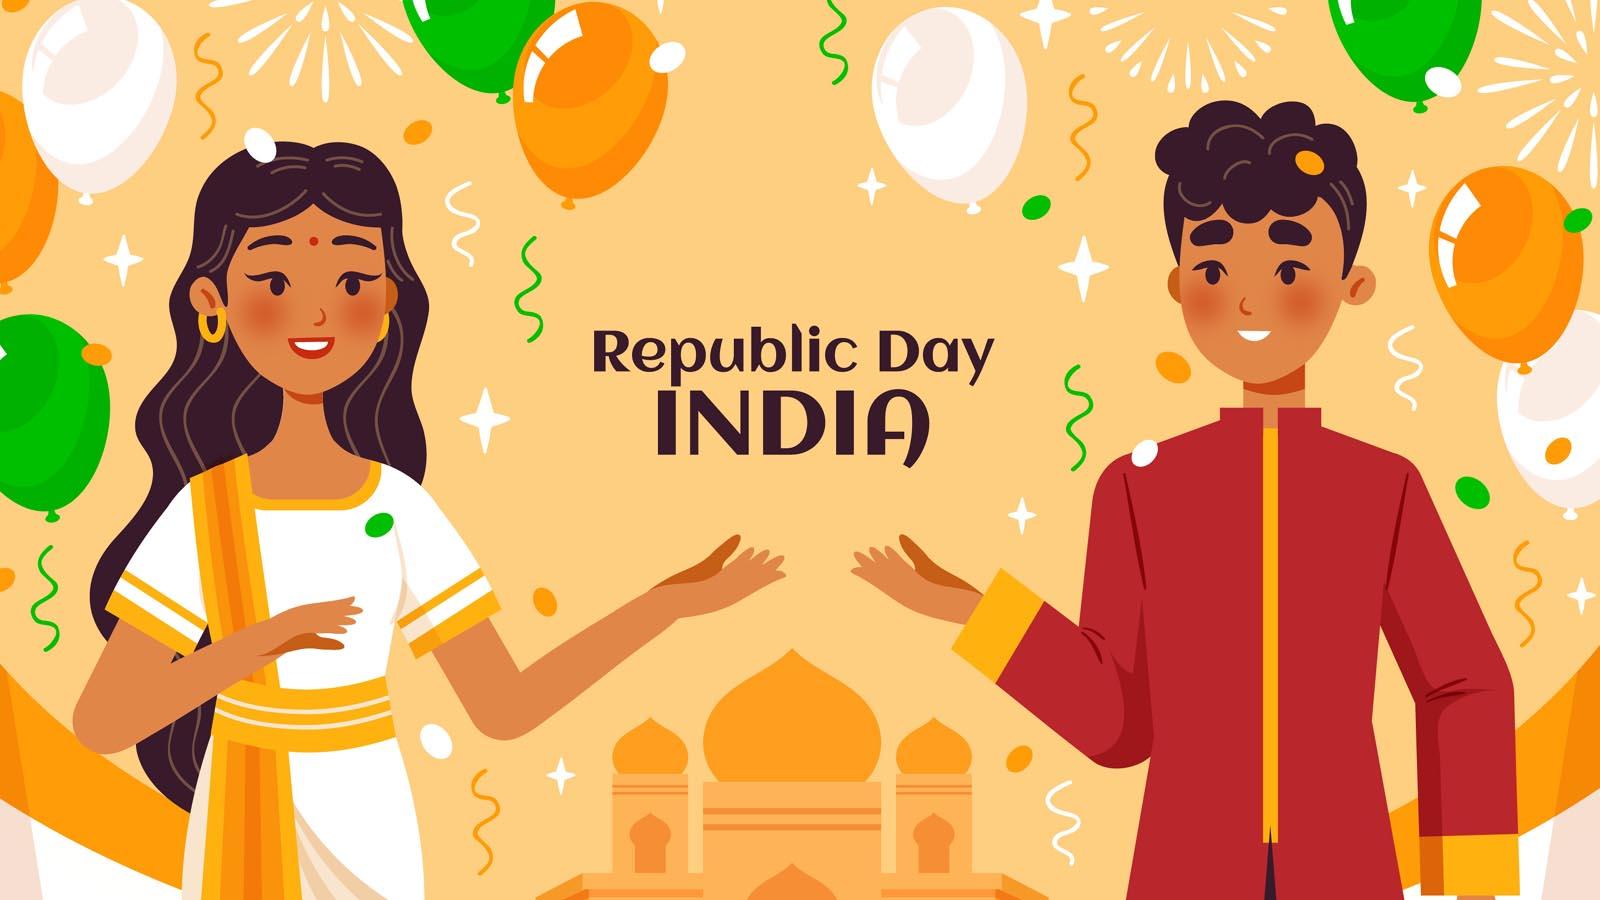 Republic Day Wishes Messages for GF and lover